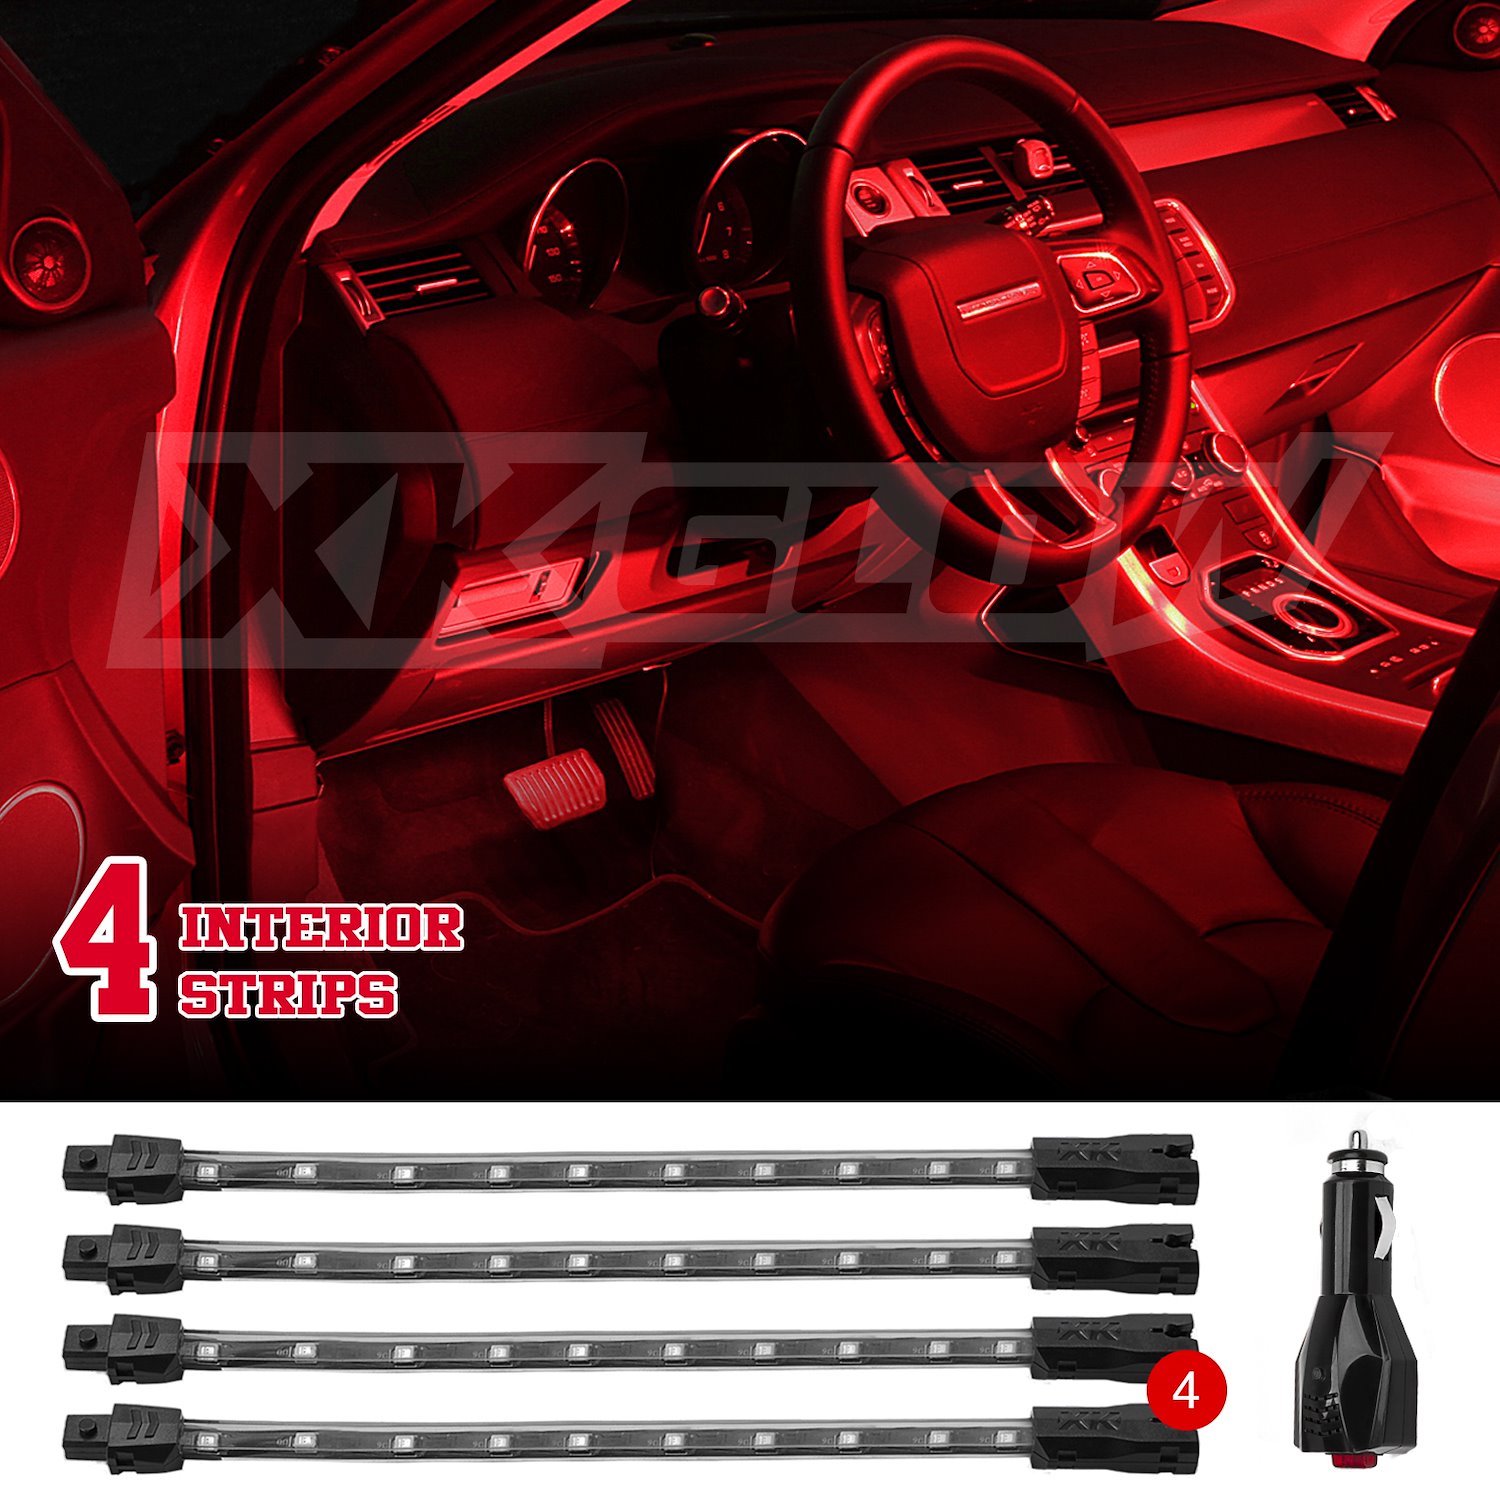 XK041004-R 4 x 8 in. XKGLOW UnderglowLED Accent Light Car/Truck Kit, Single-Color Red, Universal Fit